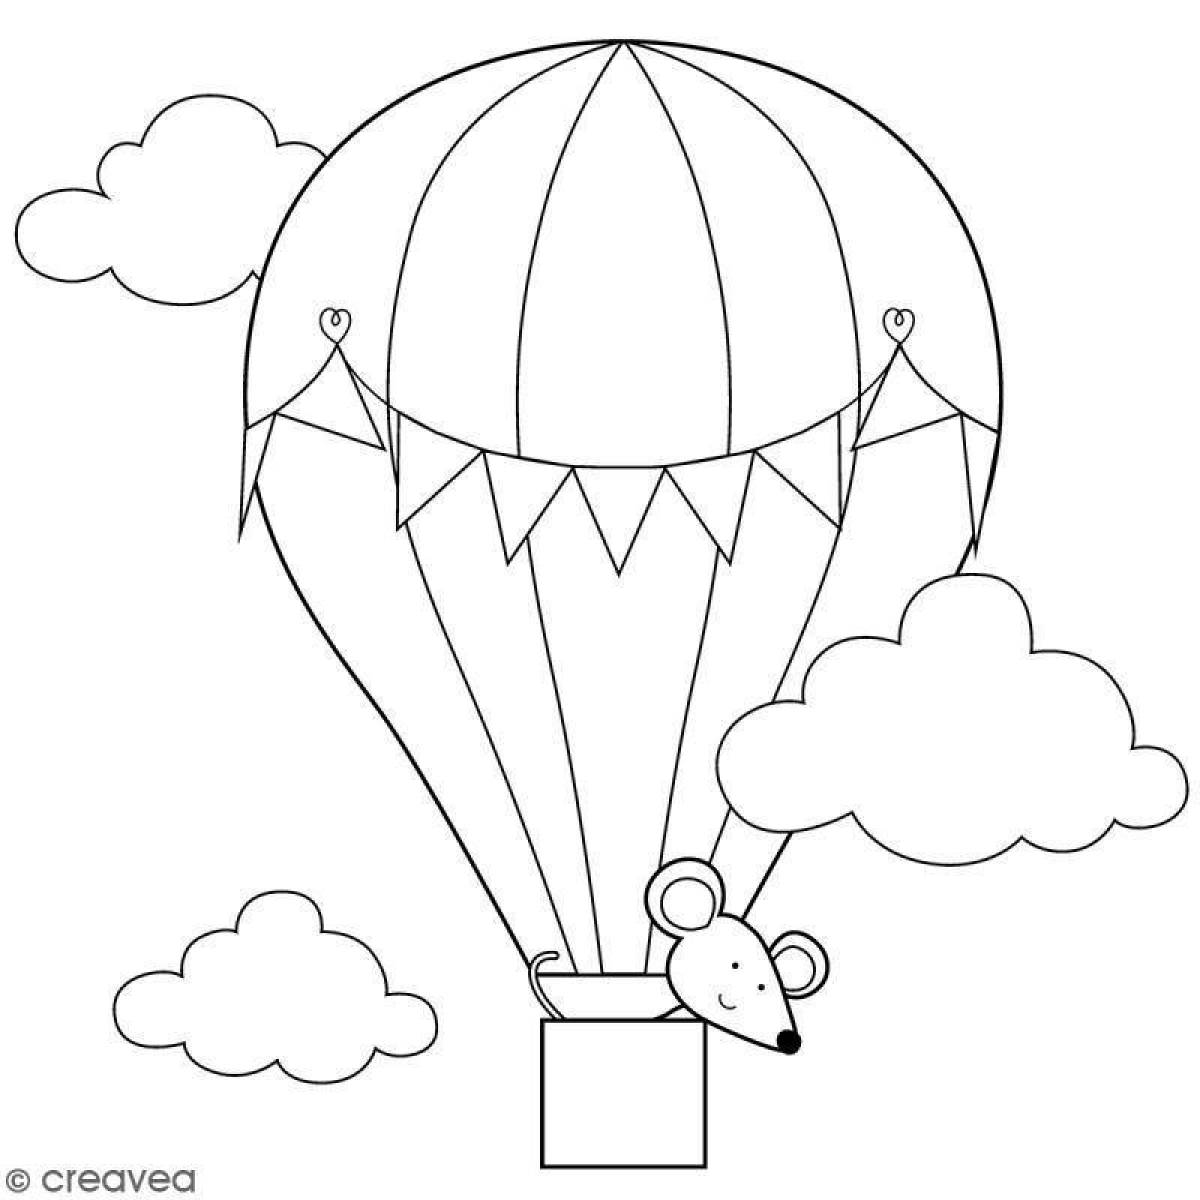 Coloring page wild balloon with a basket